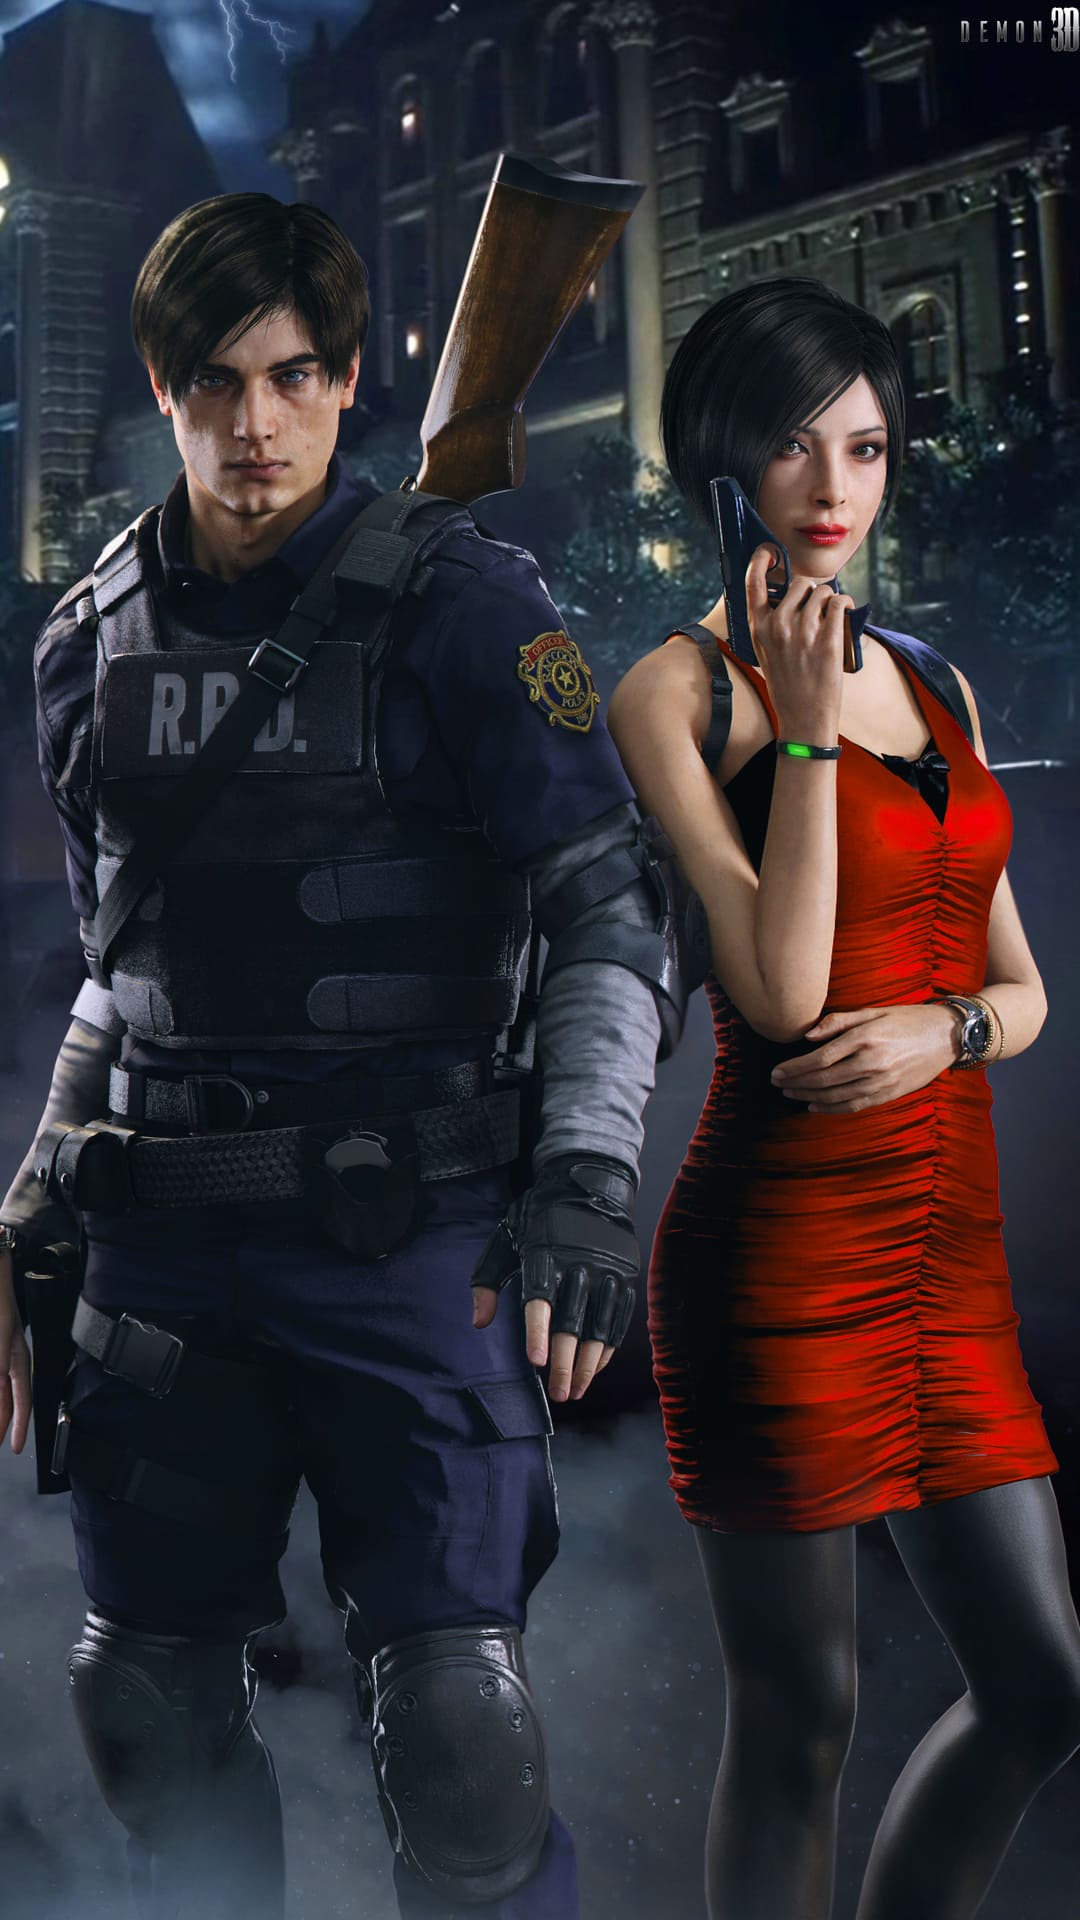 Wallpaper ID 474564  Video Game Resident Evil Phone Wallpaper  720x1280  free download